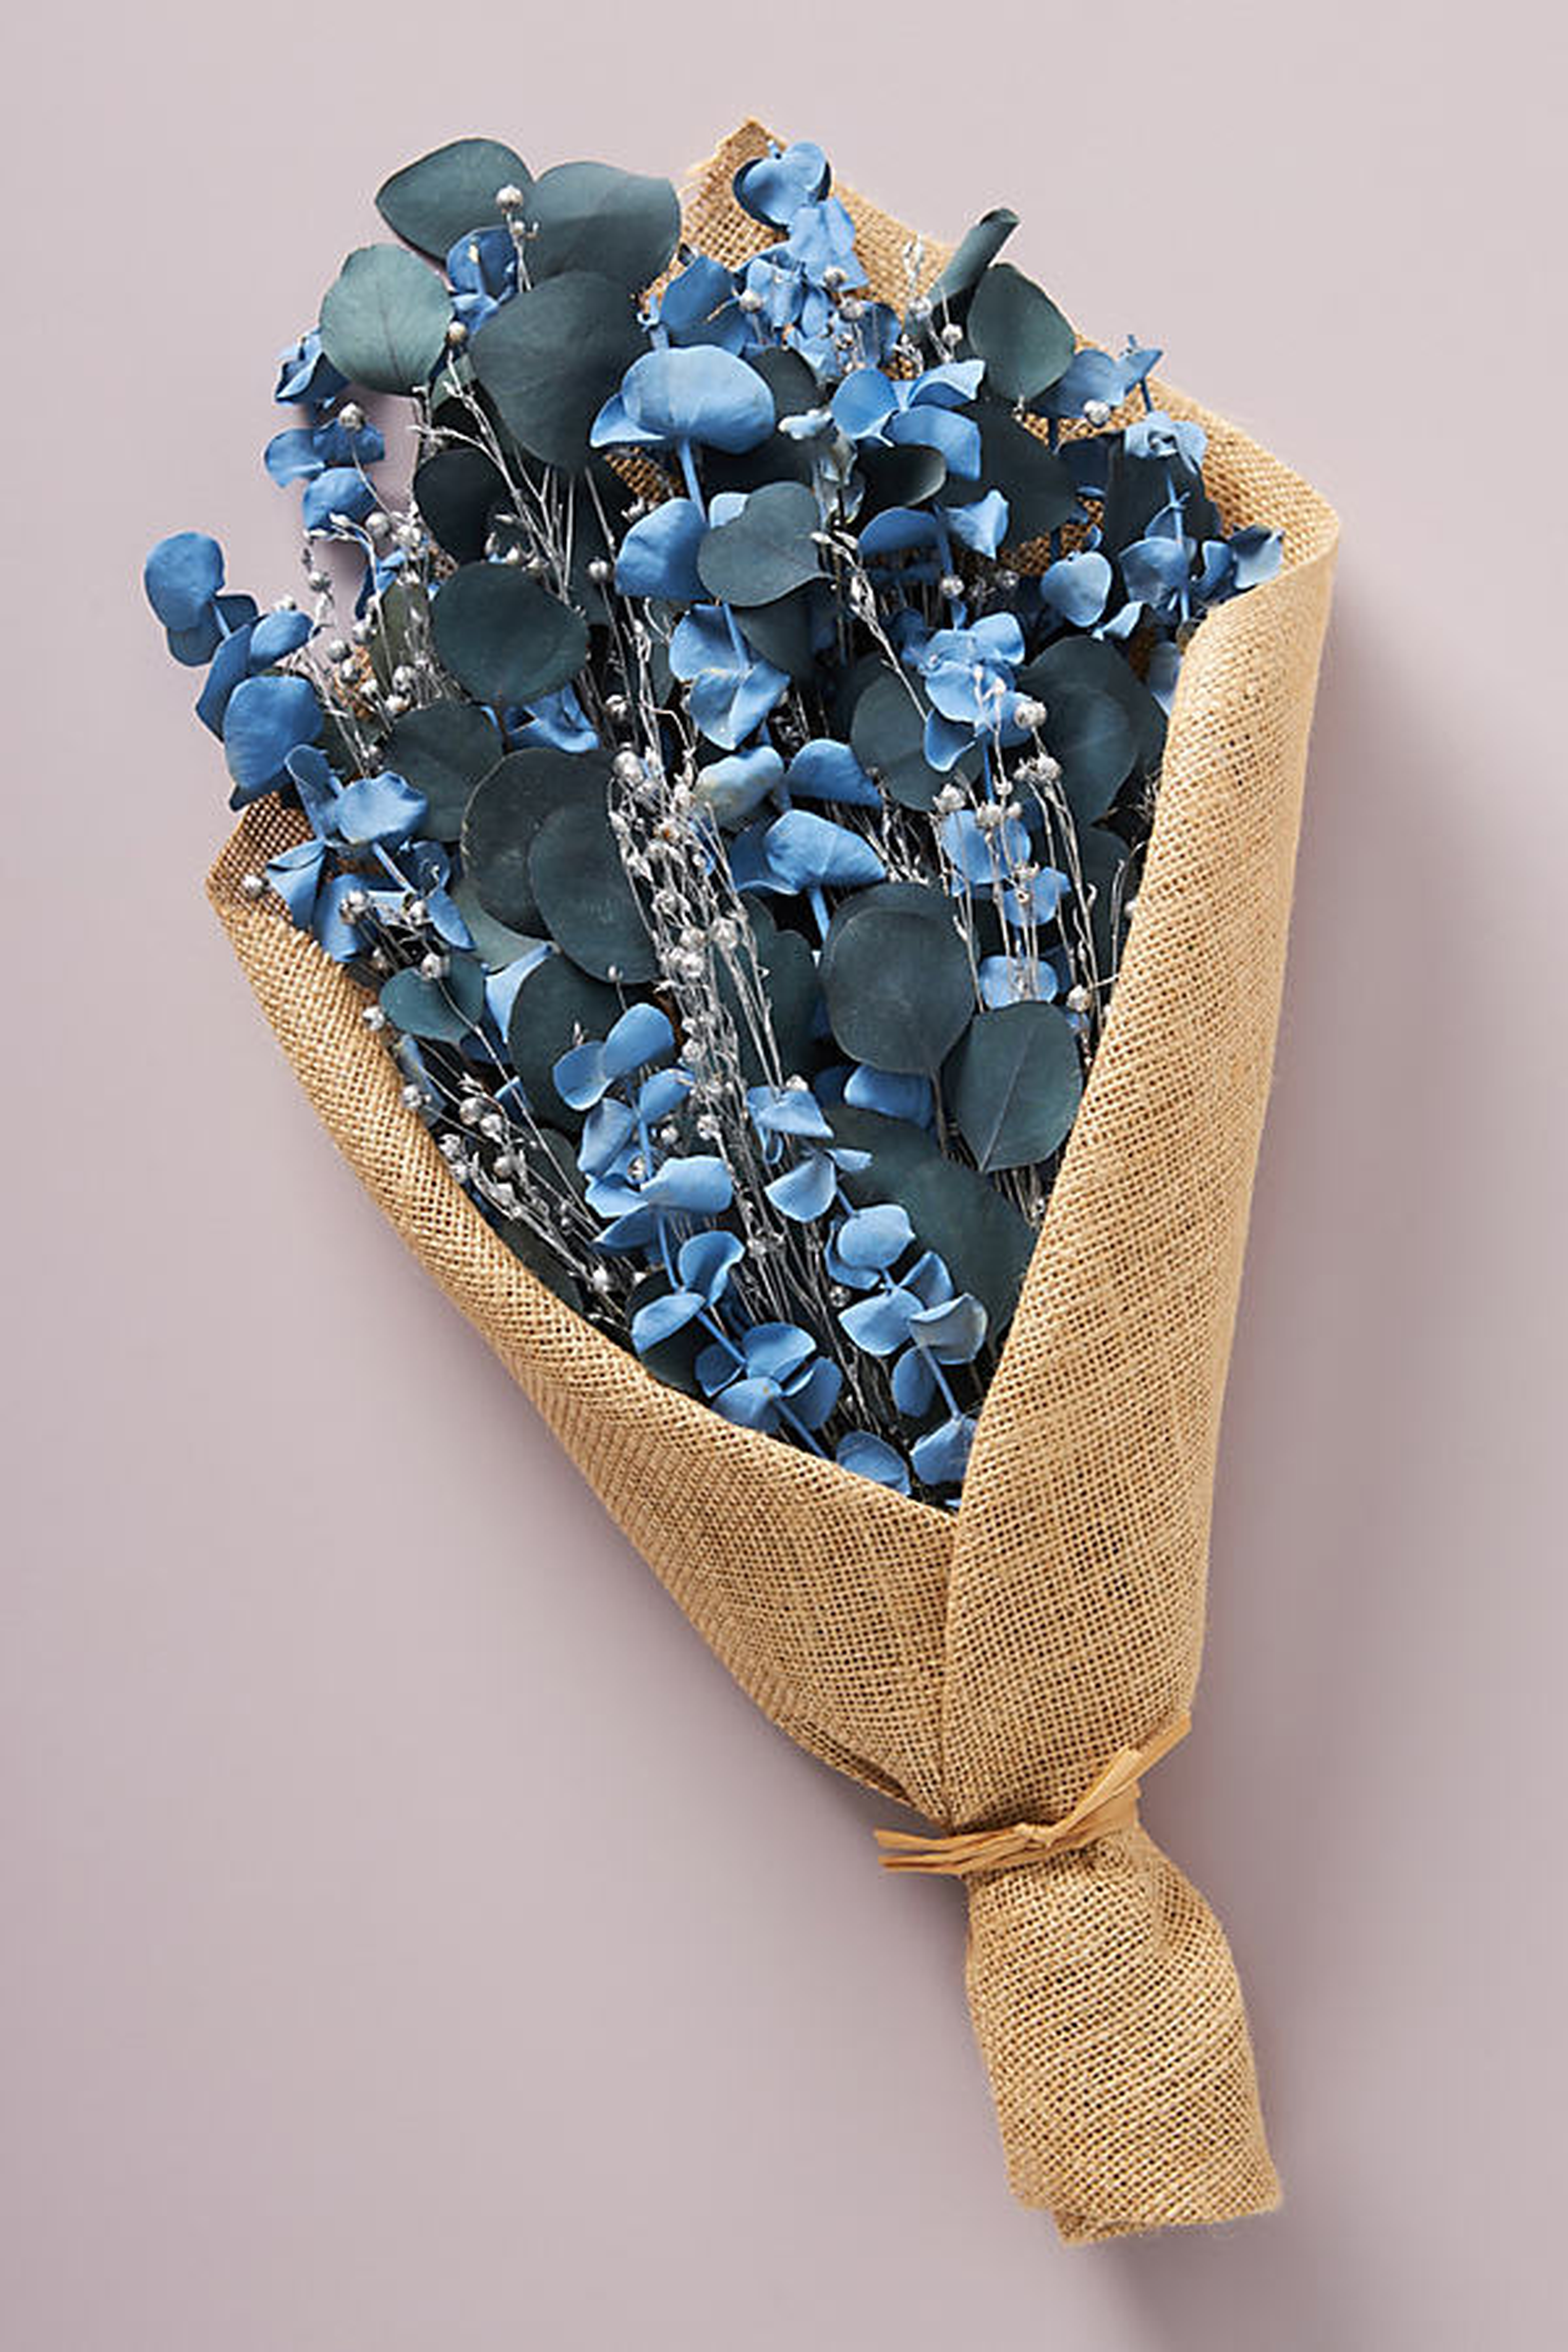 Blue Eucalyptus Bouquet By Anthropologie in Green - Anthropologie